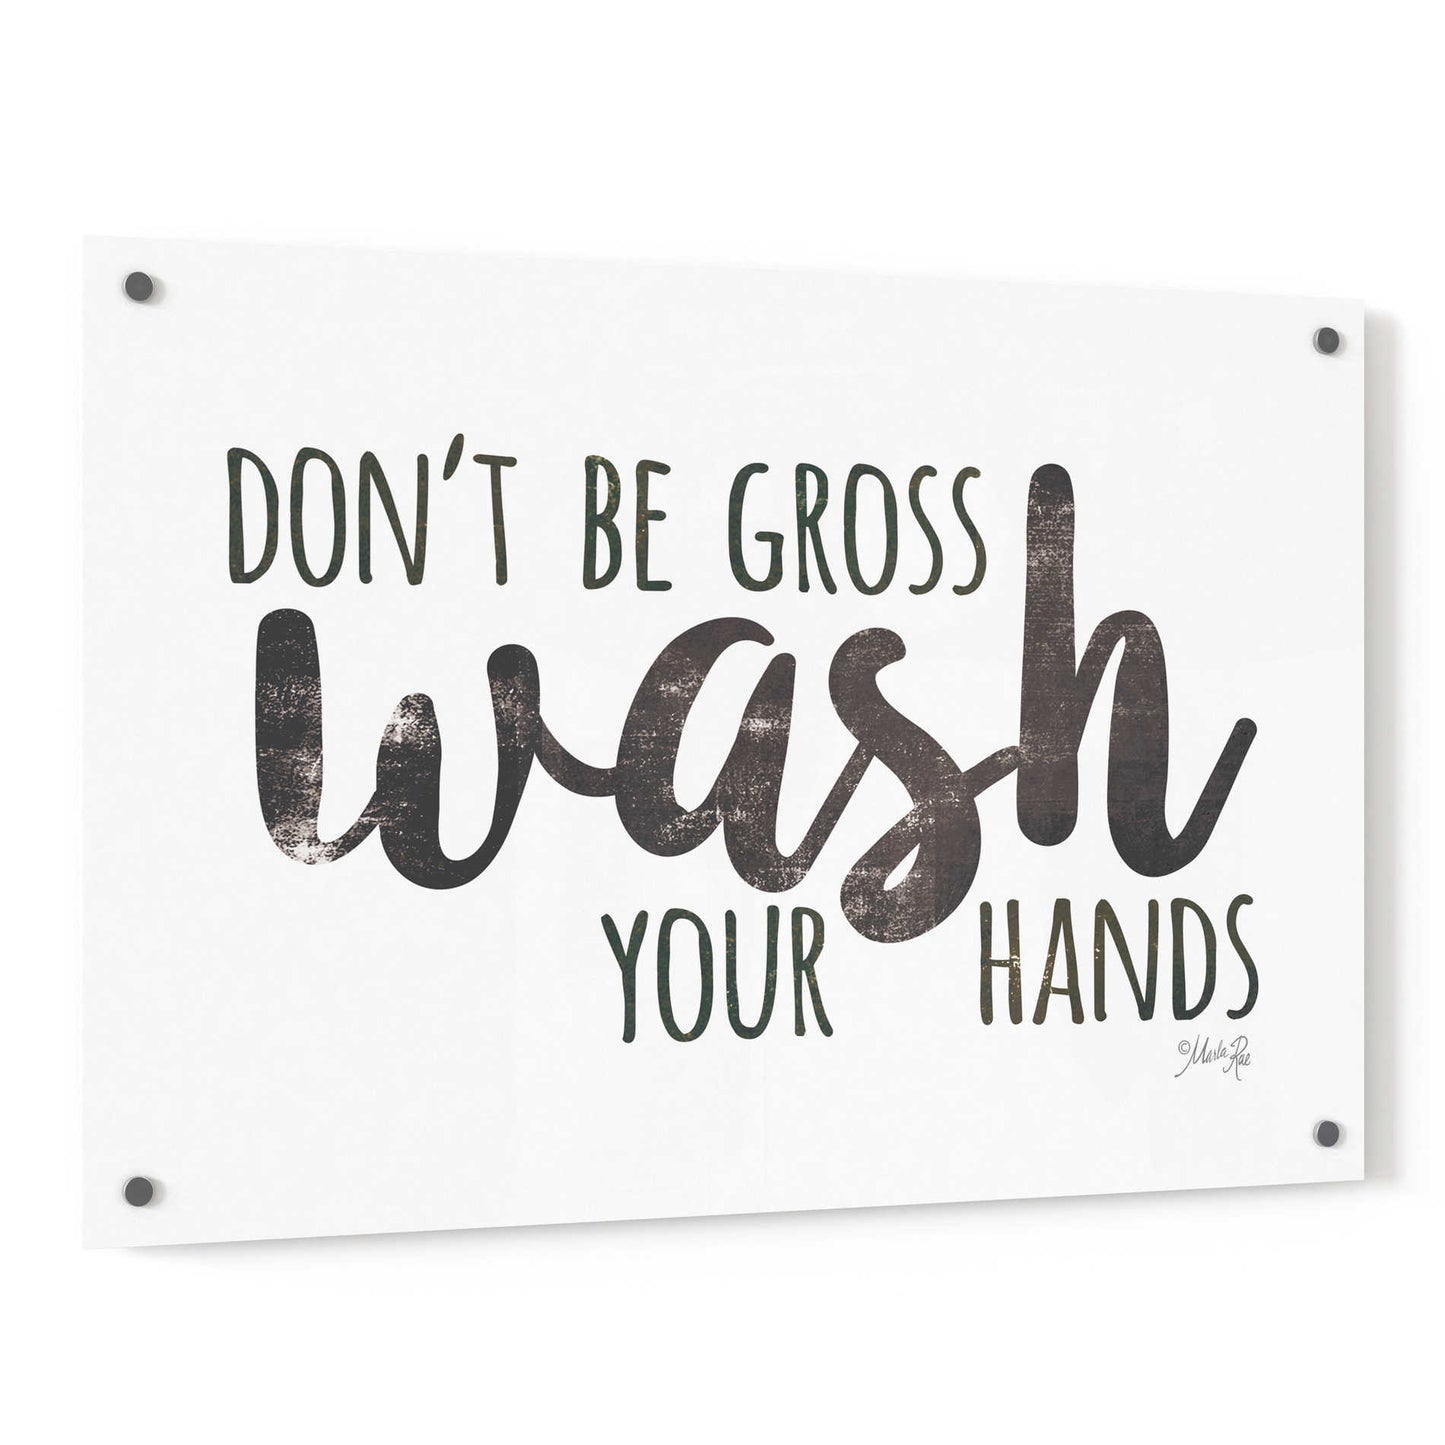 Epic Art 'Don't Be Gross - Wash Your Hands Sign' by Marla Rae, Acrylic Glass Wall Art,36x24